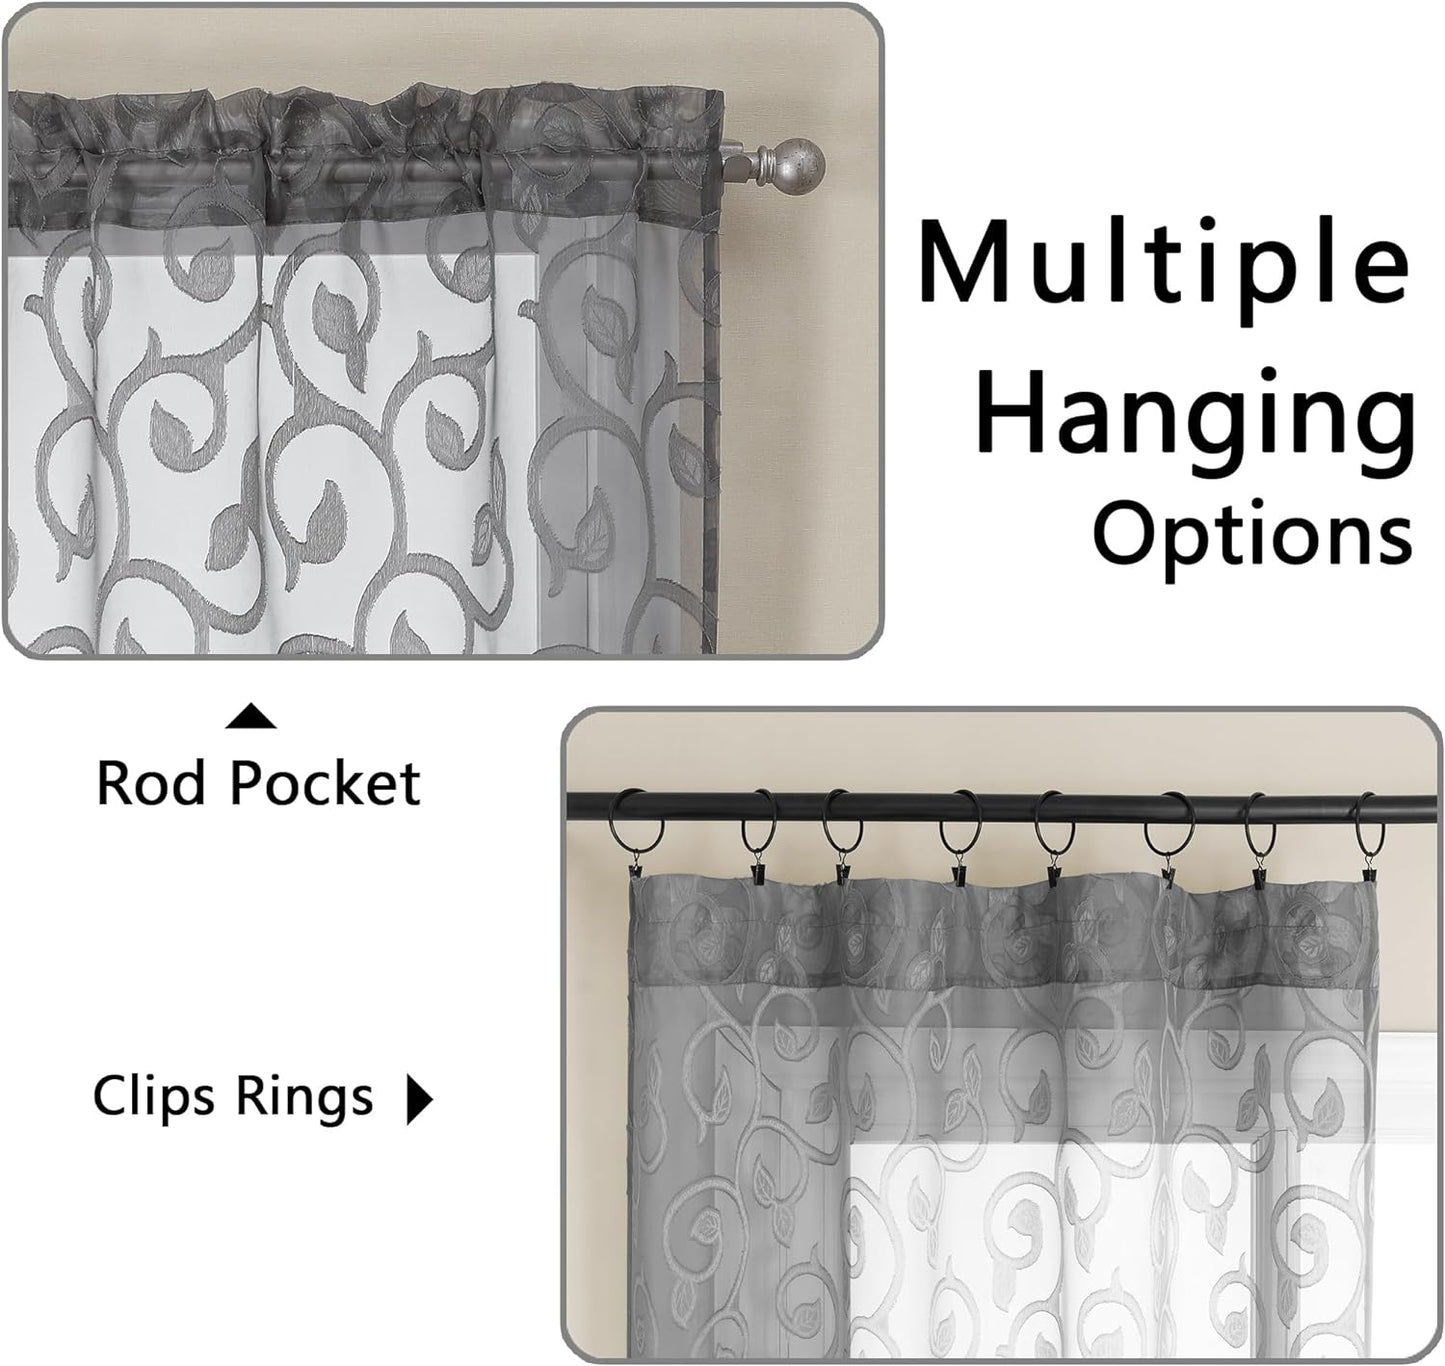 OWENIE Furman Sheer Curtains 84 Inches Long for Bedroom Living Room 2 Panels Set, Light Filtering Window Curtains, Semi Transparent Voile Top Dual Rod Pocket, Grey, 40Wx84L Inch, Total 84 Inches Width  OWENIE   